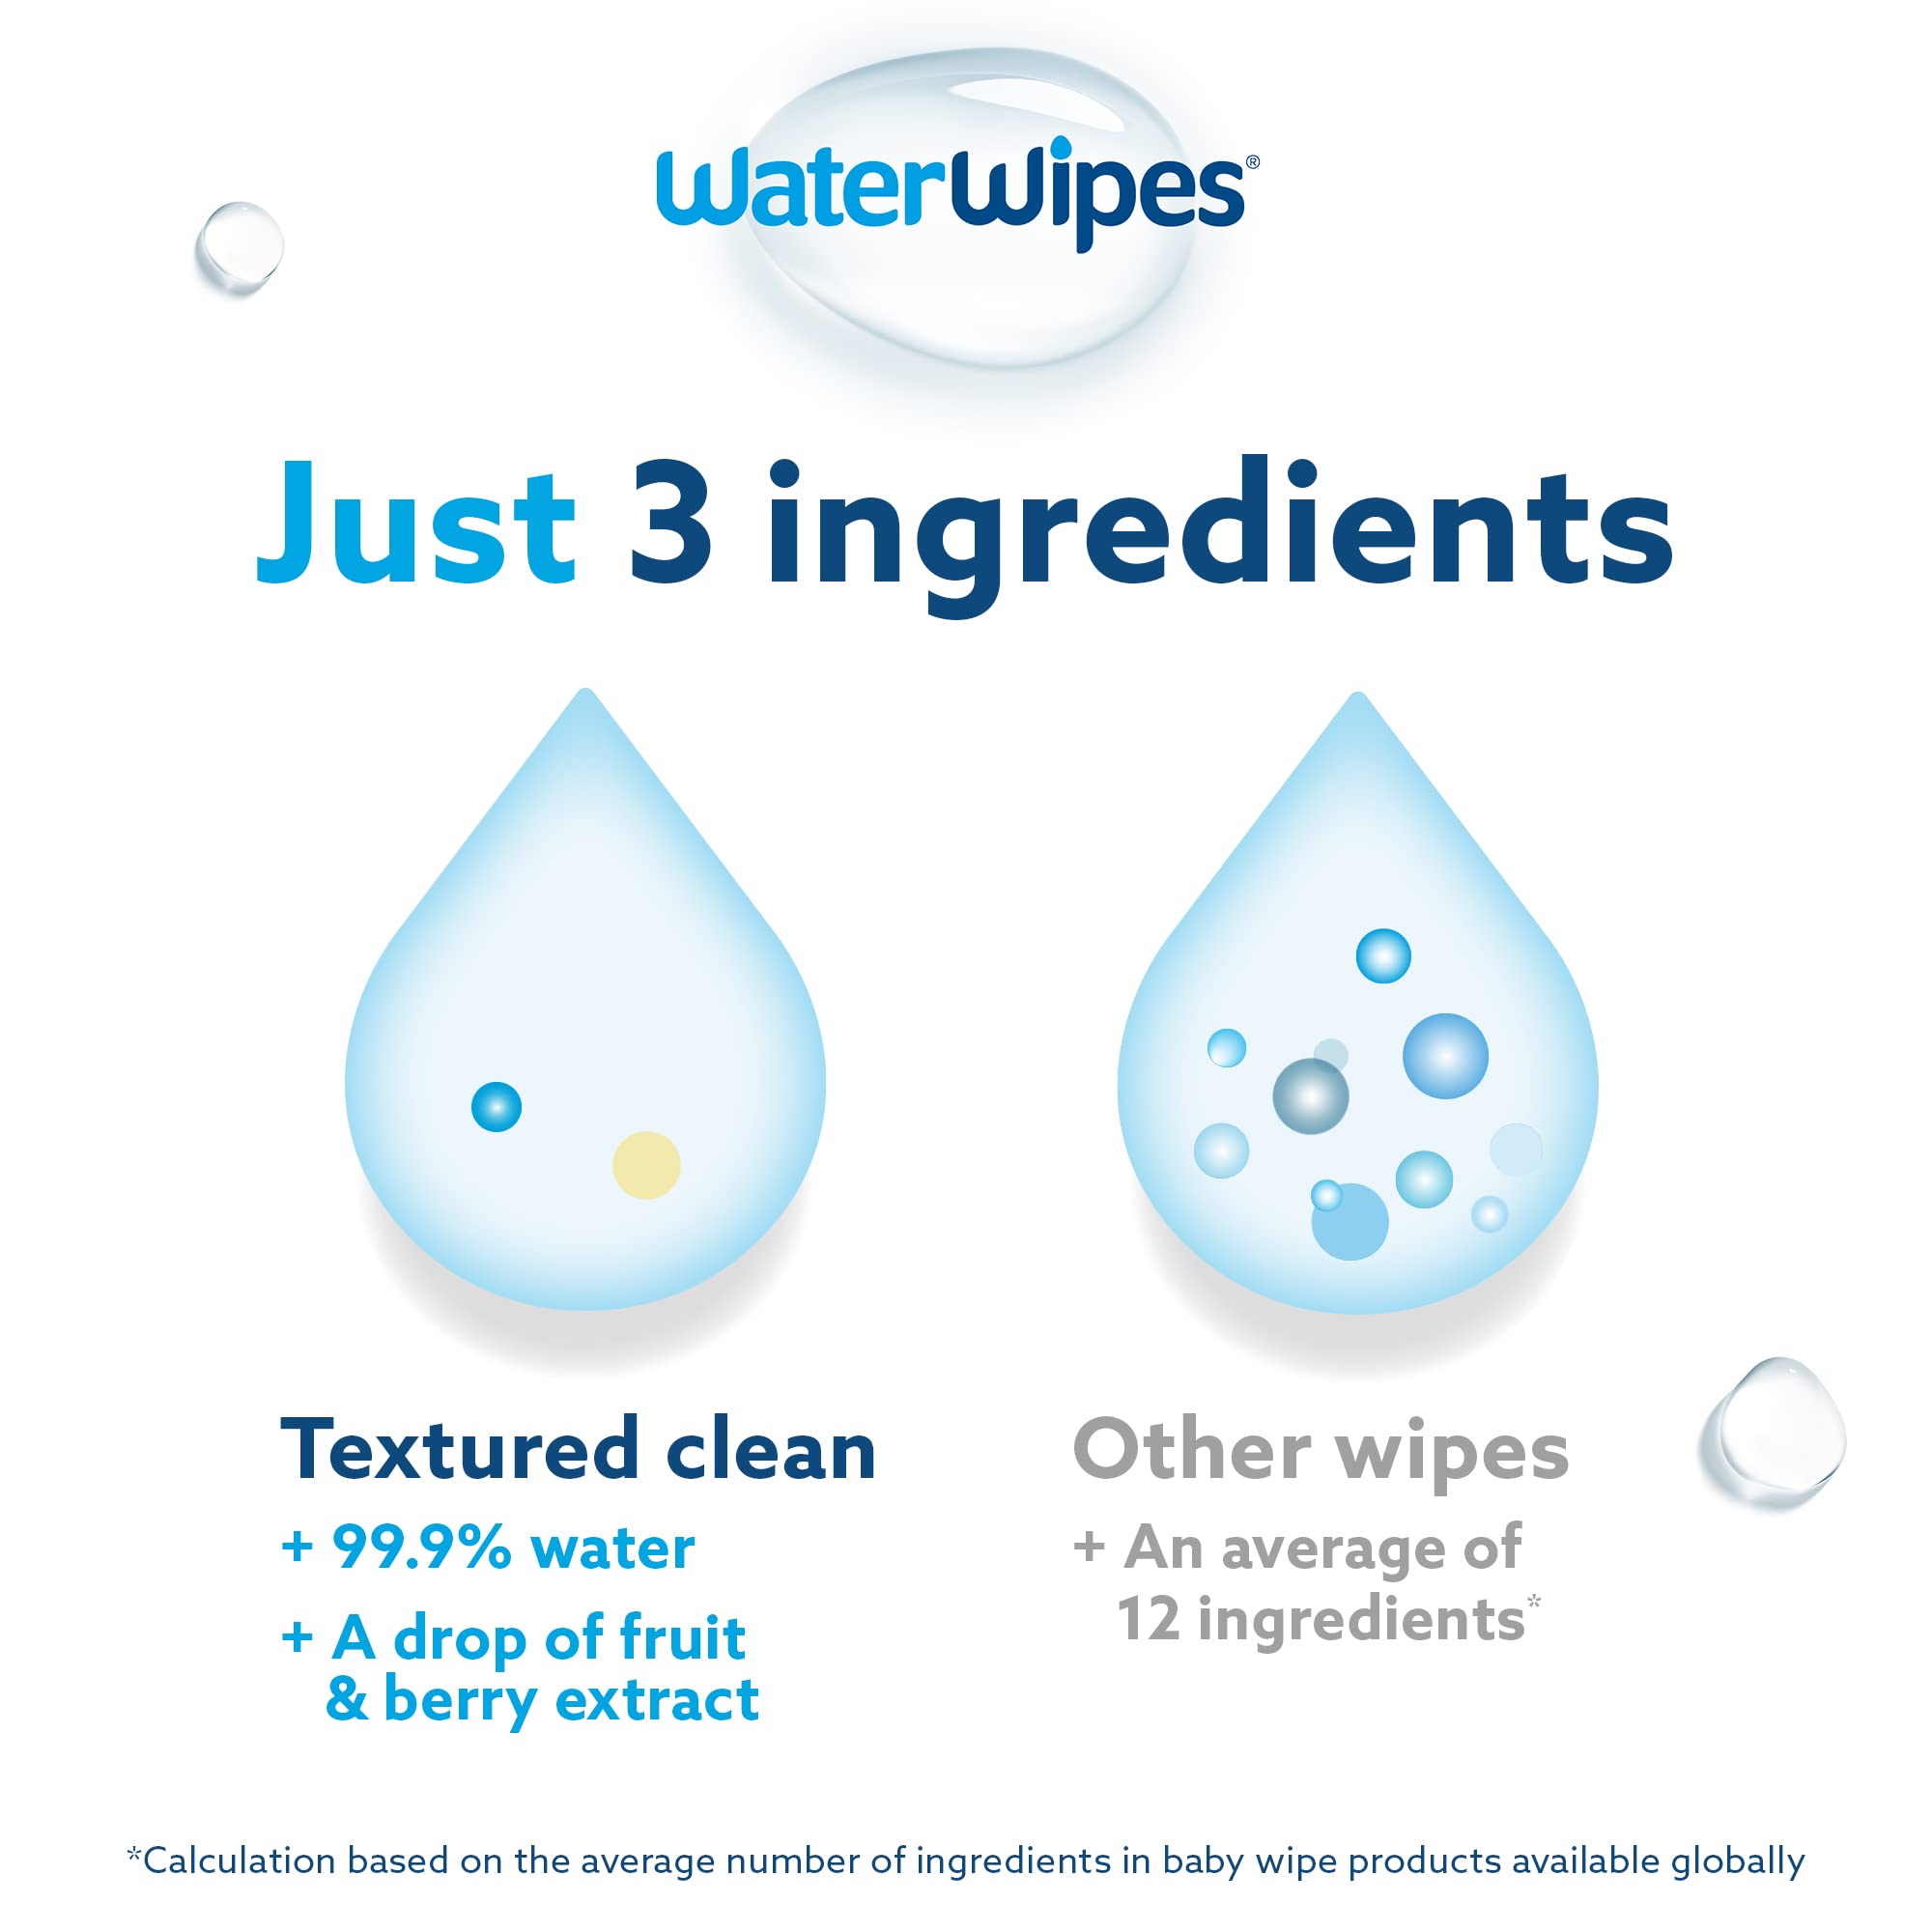 WaterWipes Plastic-Free Textured Clean, Toddler & Baby Wipes, 99.9% Water Based Wipes, Unscented & Hypoallergenic for Sensitive Skin, 720 Count (12 packs), Packaging May Vary